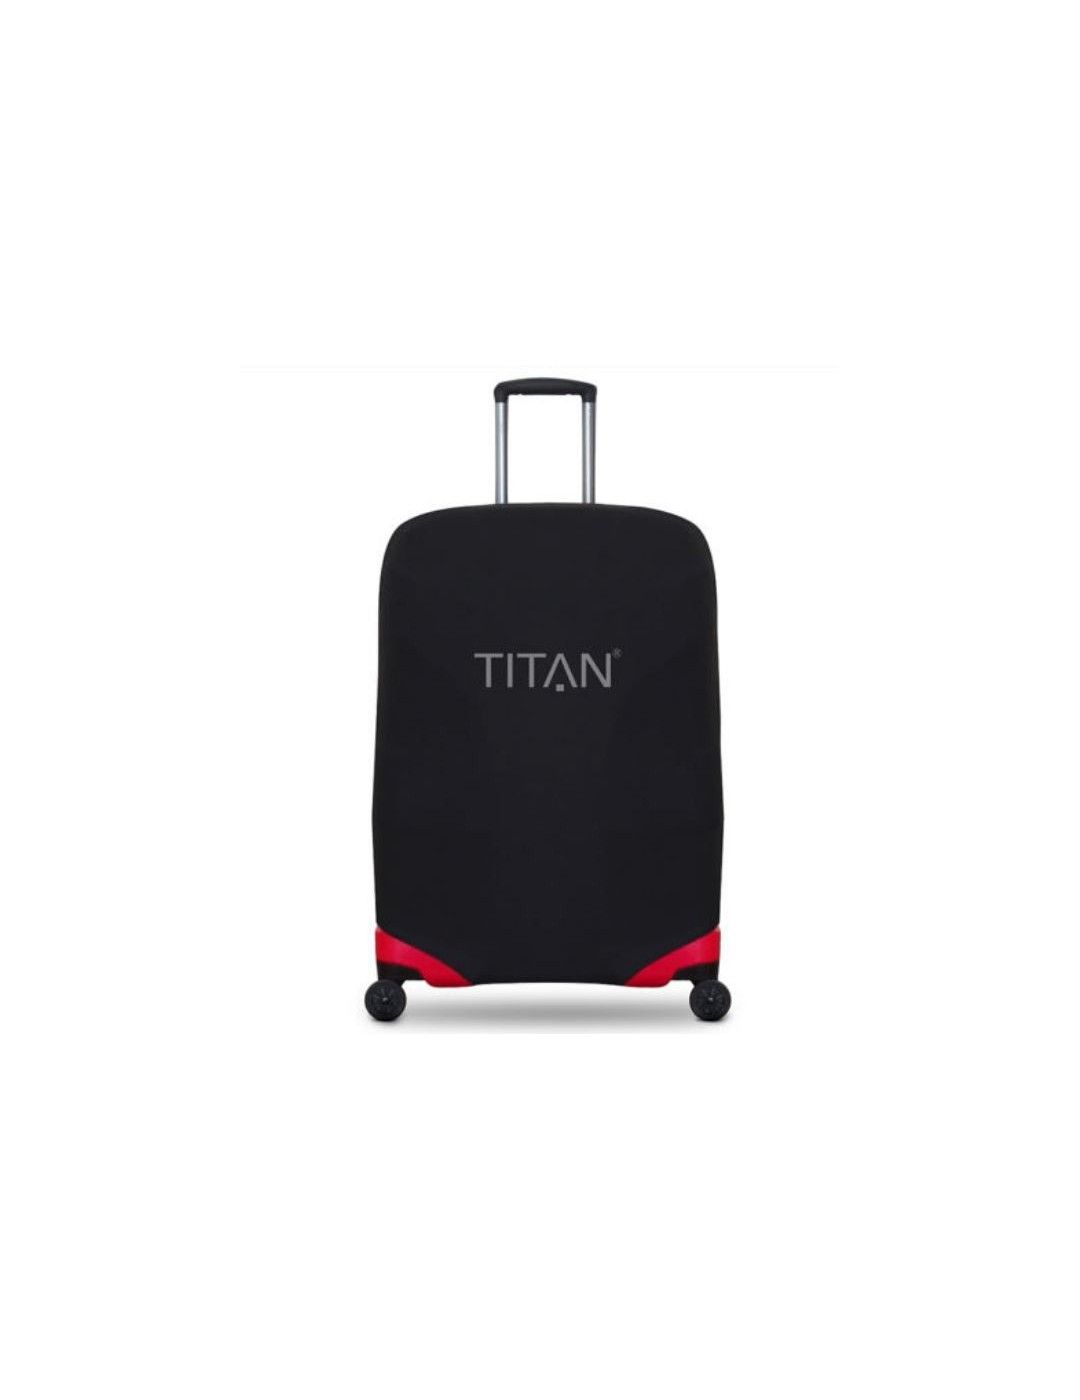 TITAN Luggage Cover M+ for middle sized suitcases